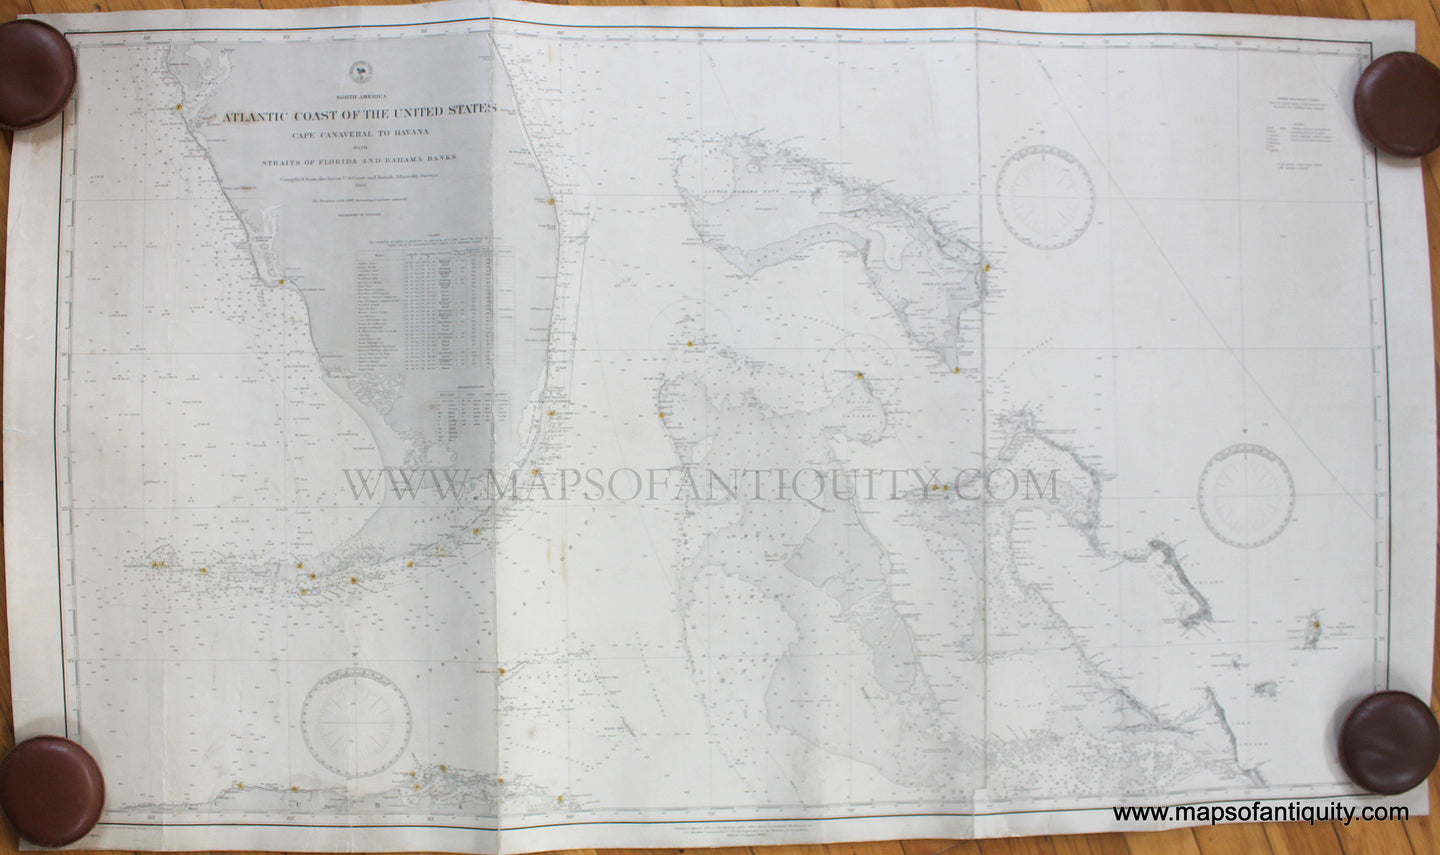 Antique-Nautical-Chart-Atlantic-Coast-of-the-United-States---Cape-Canaveral-to-Havana-with-Straits-of-Florida-and-Bahama-Banks-Nautical-Charts--1886/1886-Hydrographic-Office-of-the-US-Navy-Maps-Of-Antiquity-1800s-19th-century